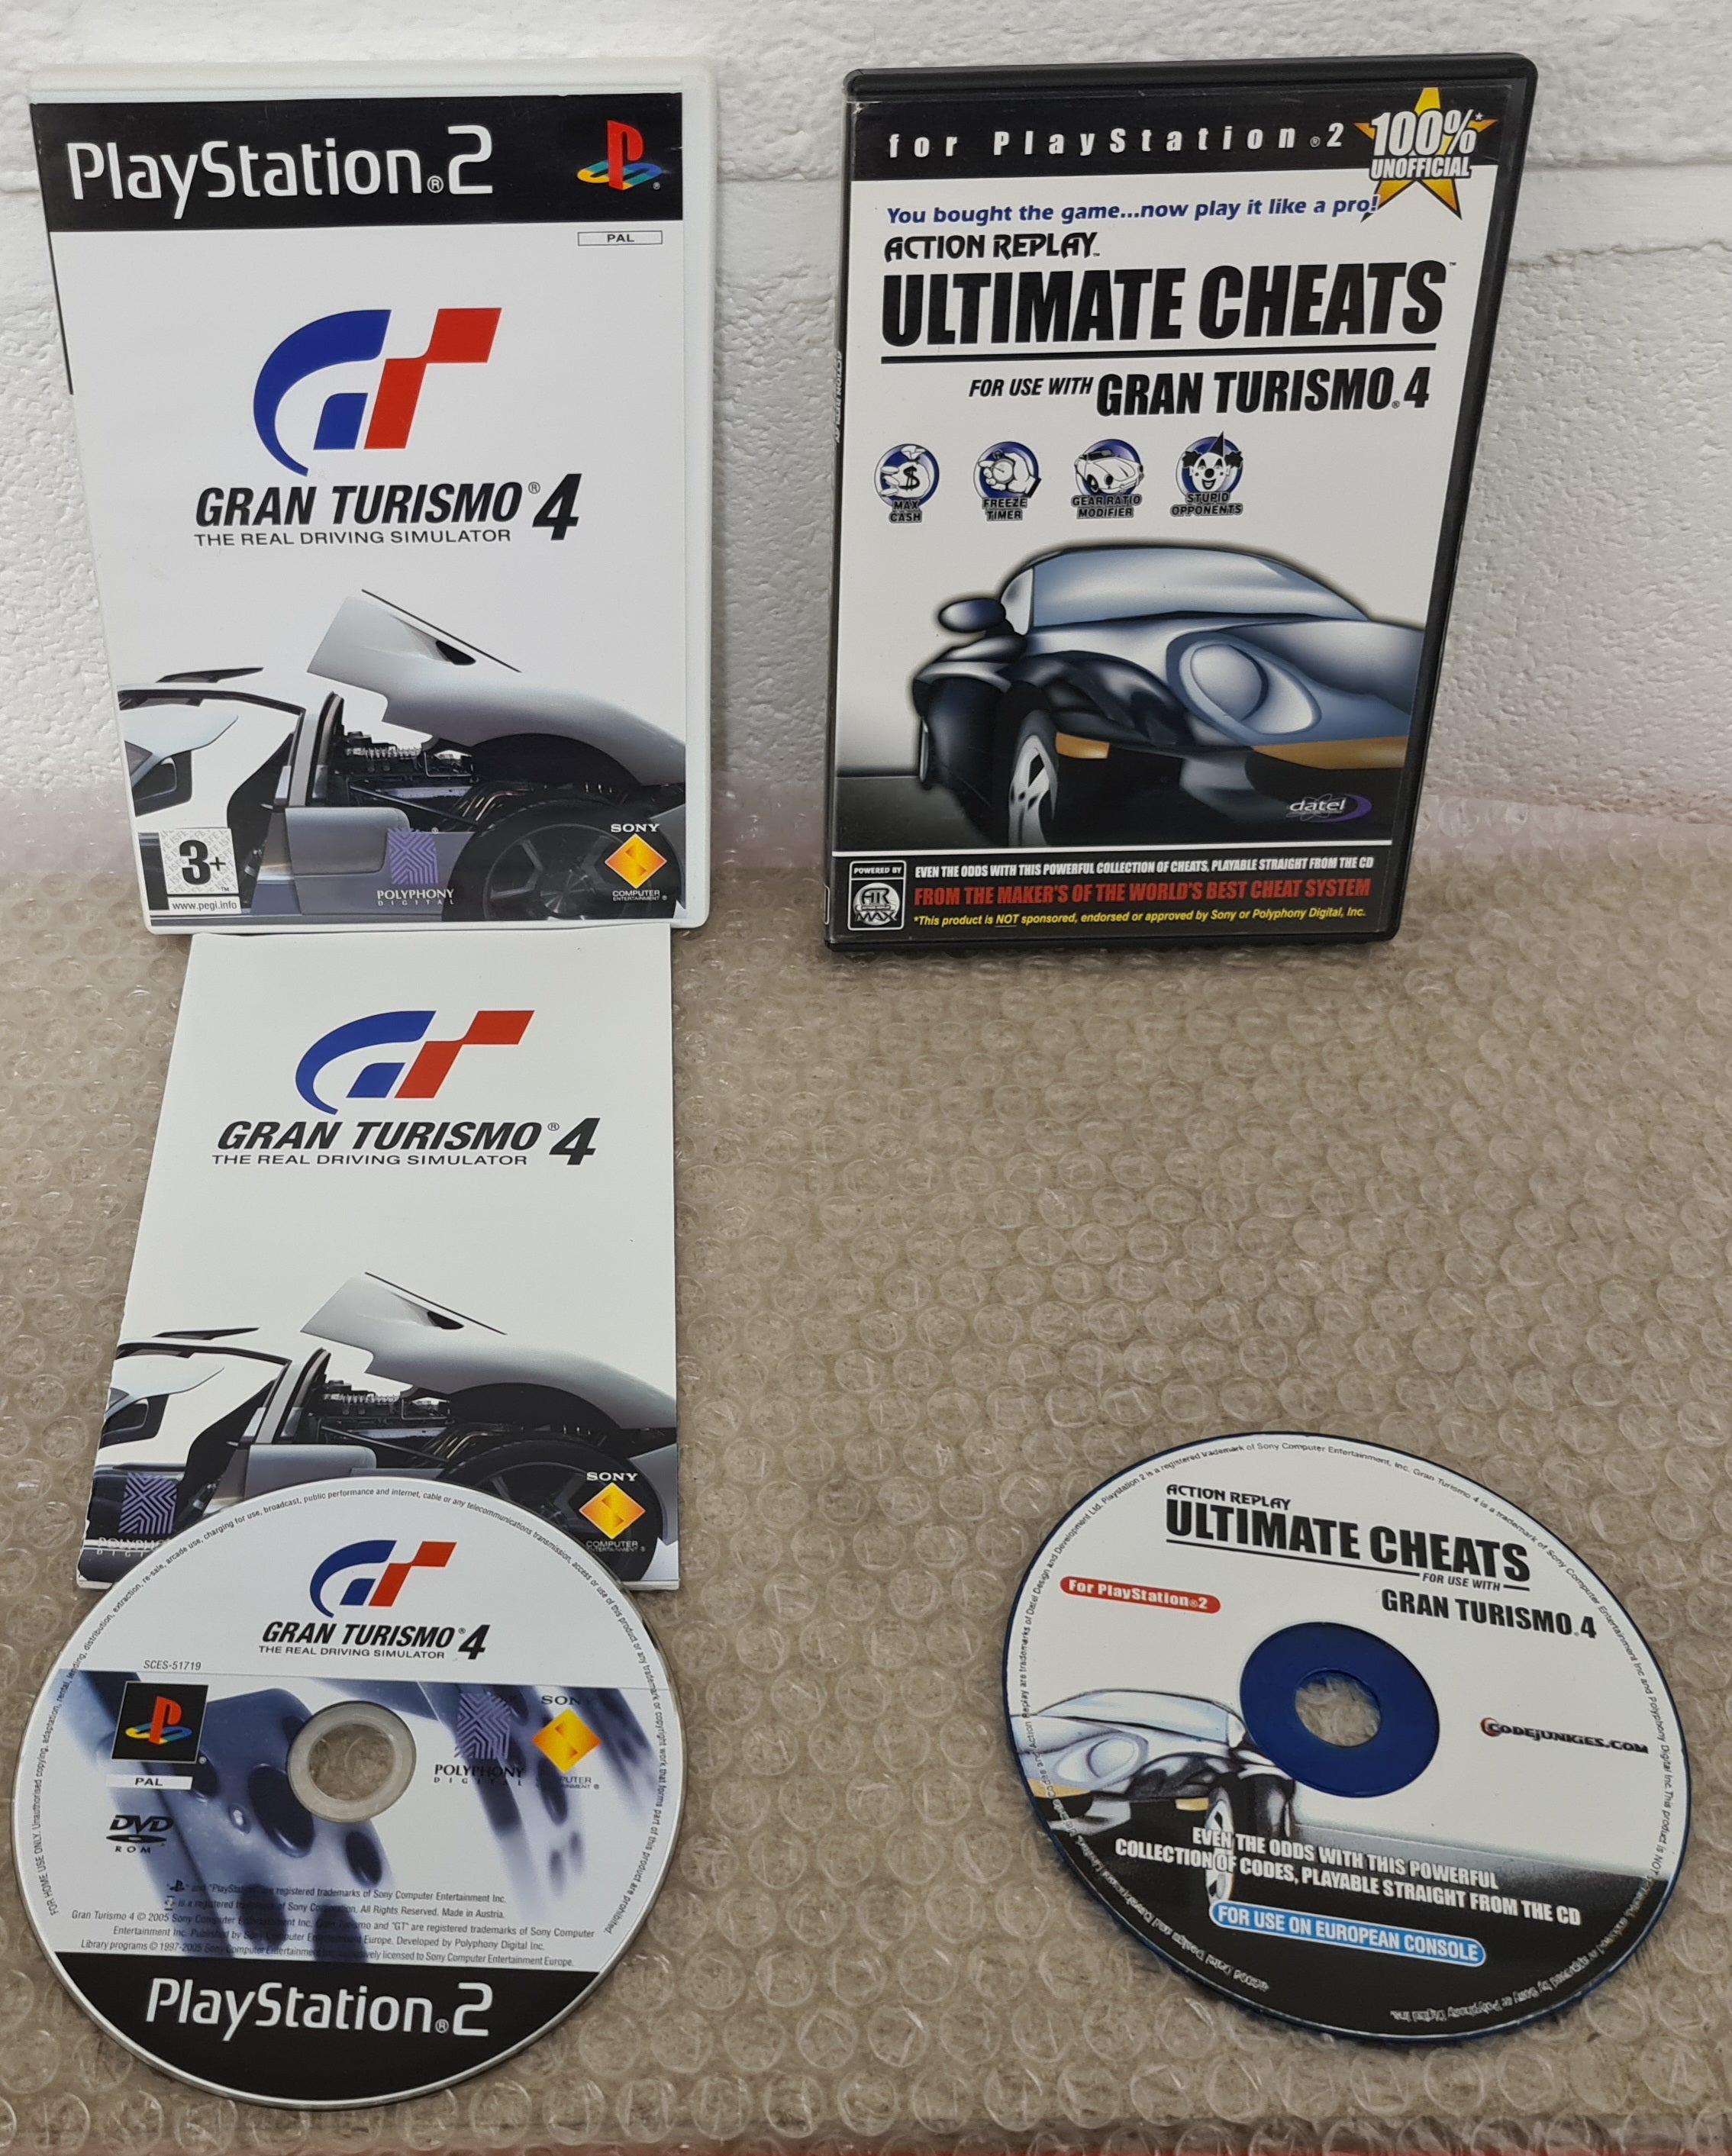 Cheat Codes for Gran Turismo 4 (FR) on Action Replay MAX - Codejunkies